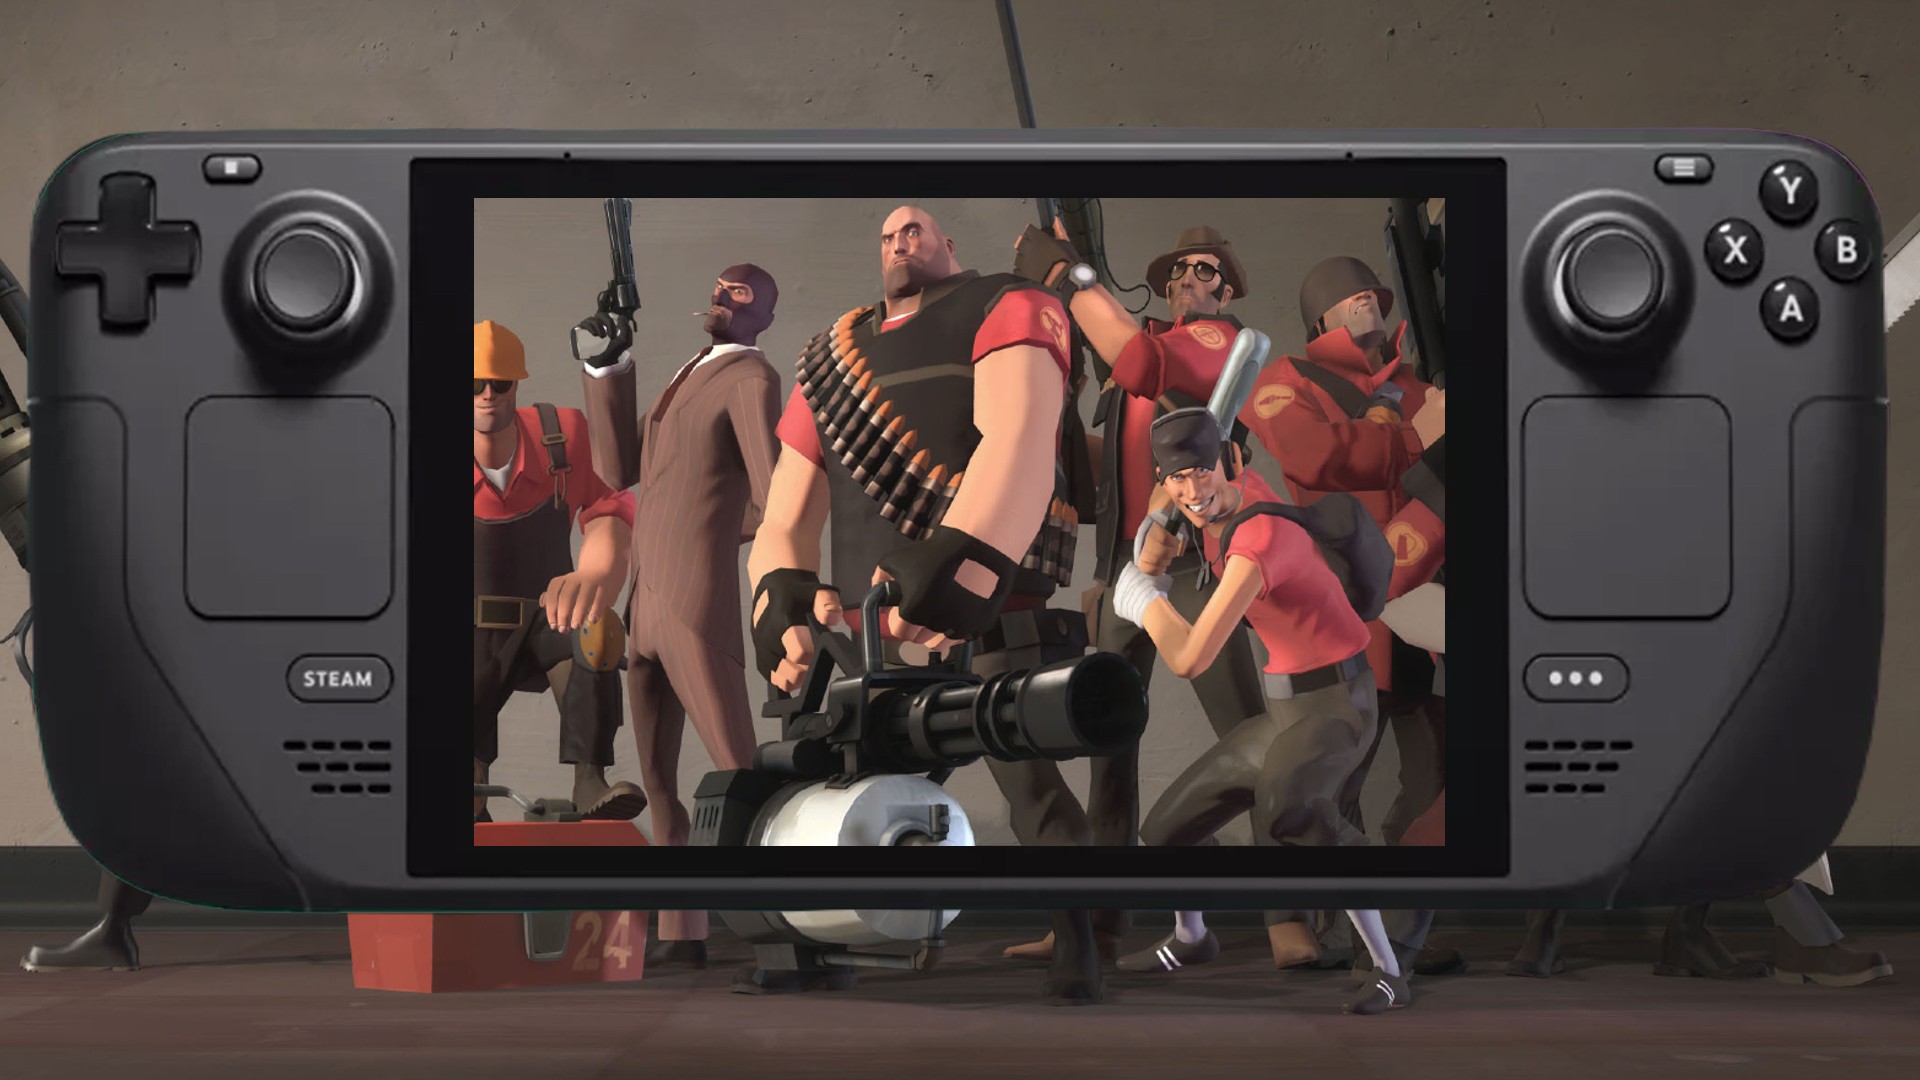 Is Team Fortress 2 Steam Deck compatible?